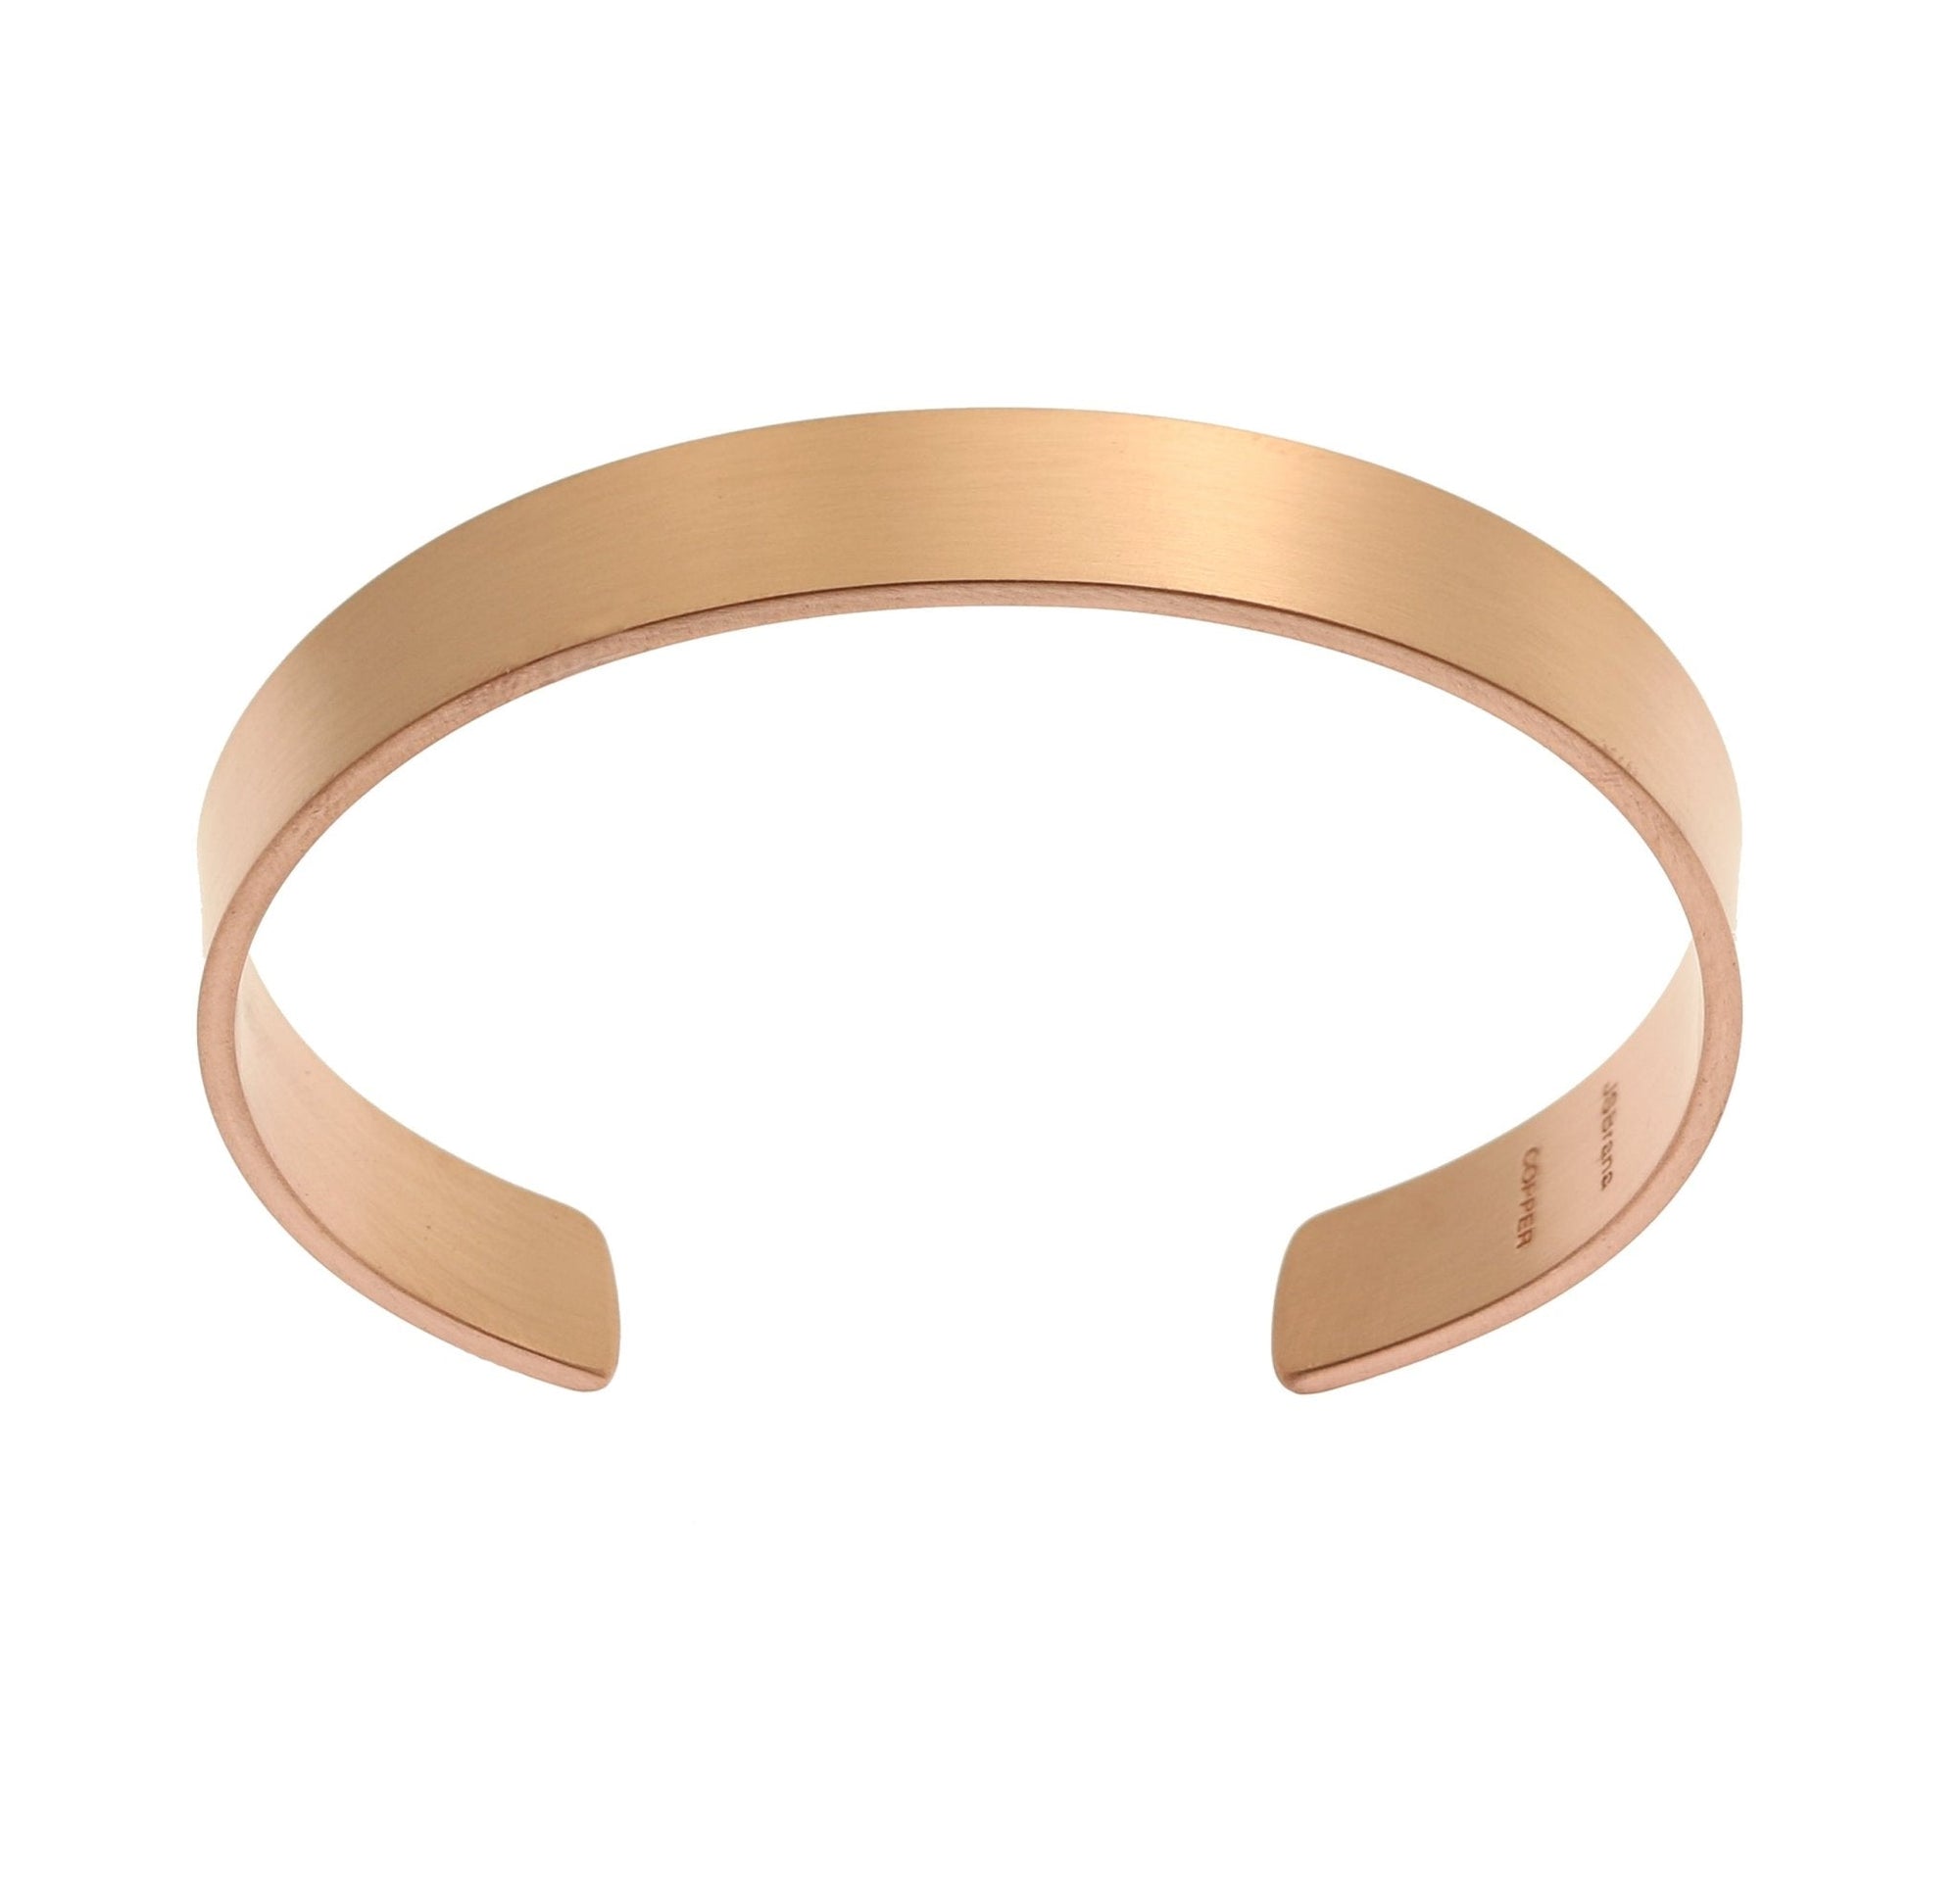 10mm Wide Brushed Copper Cuff Bracelet Front View